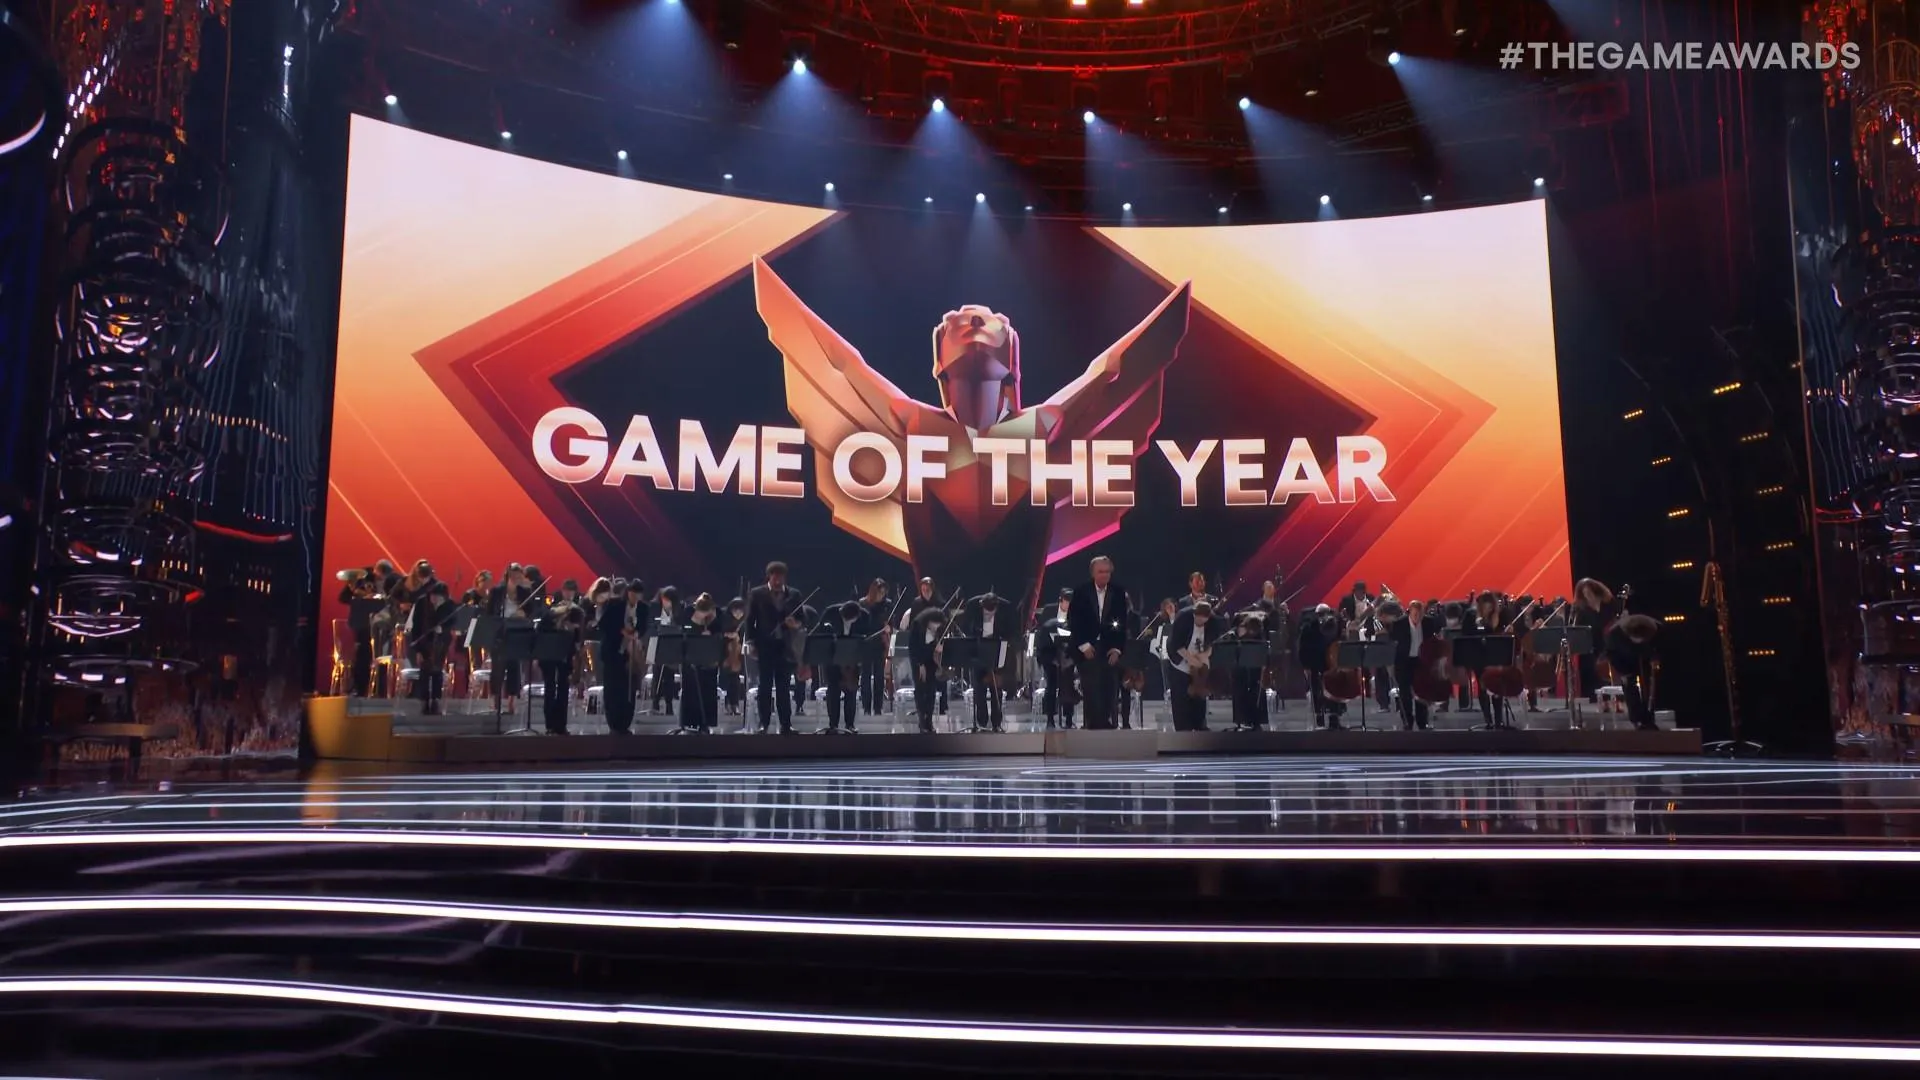 Complete list of The Game Awards 2018 winners